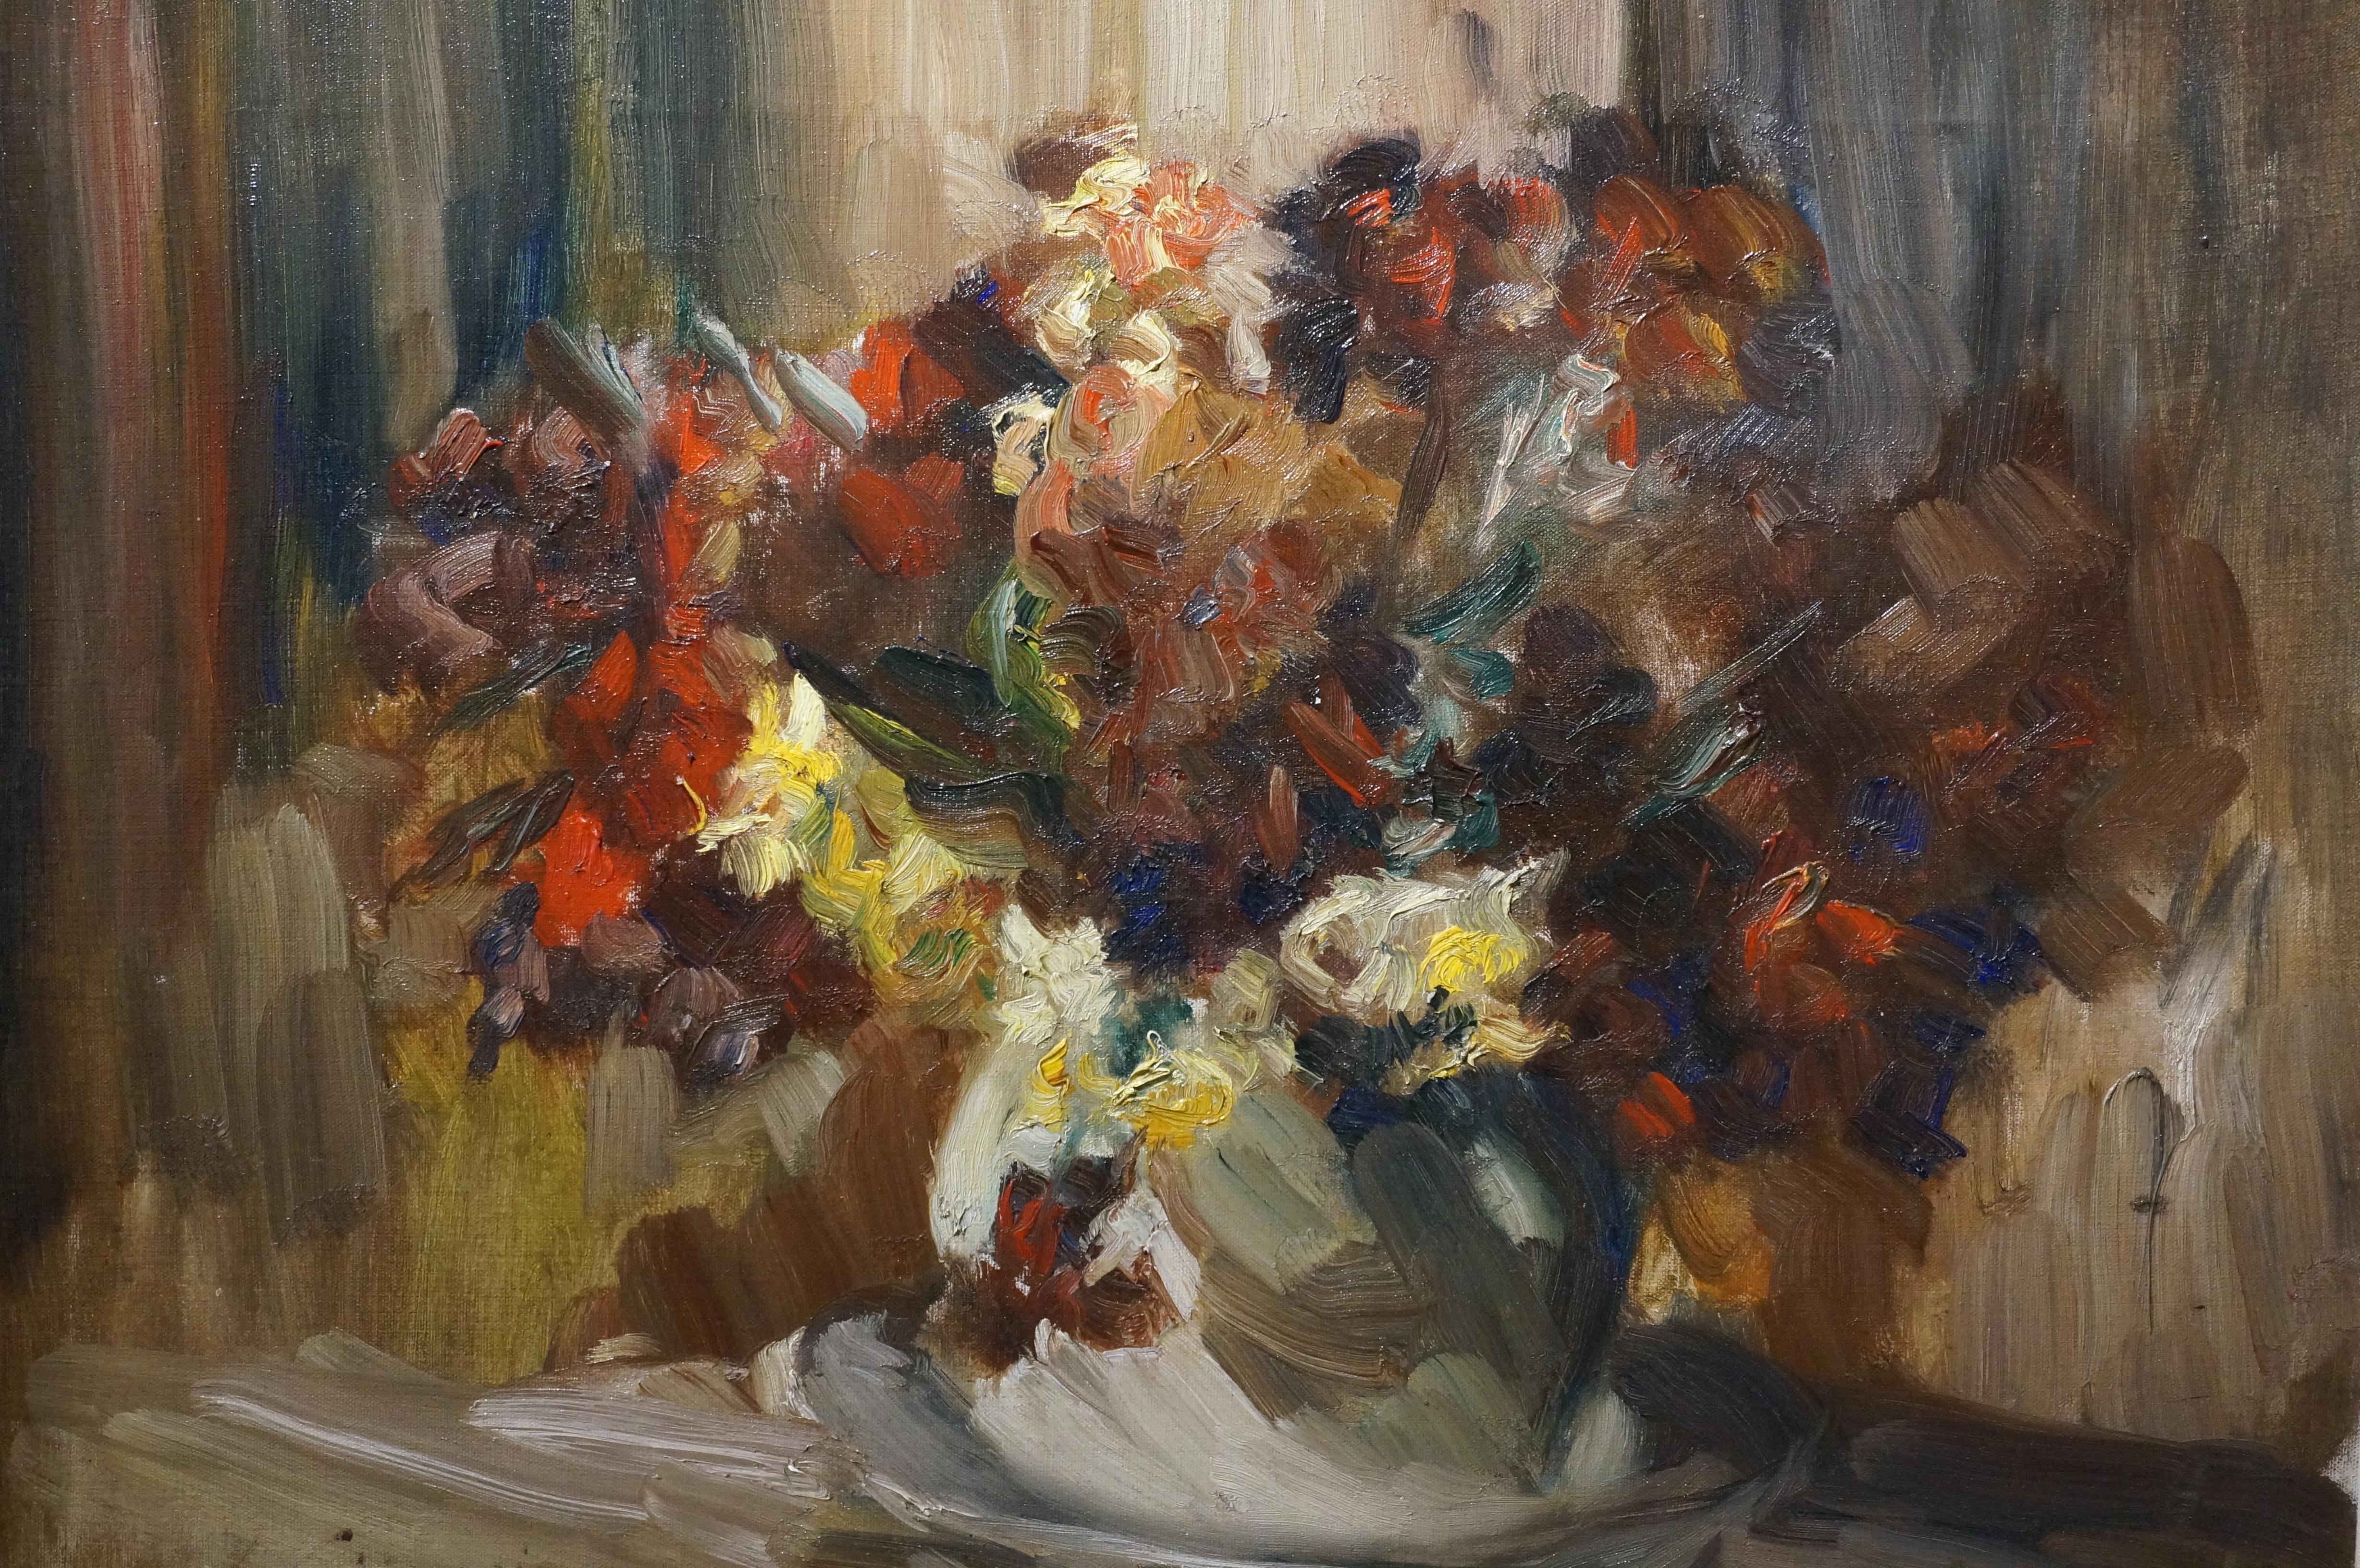 Still life with flowers in a vase, signed V. Simonin.
Victor Simonin was born in Brussels in 1877.
He was educated at the ‘Academie voor schone Kunsten’ in his home town and was a member of the artist association ‘Le Sillon’.
He died in